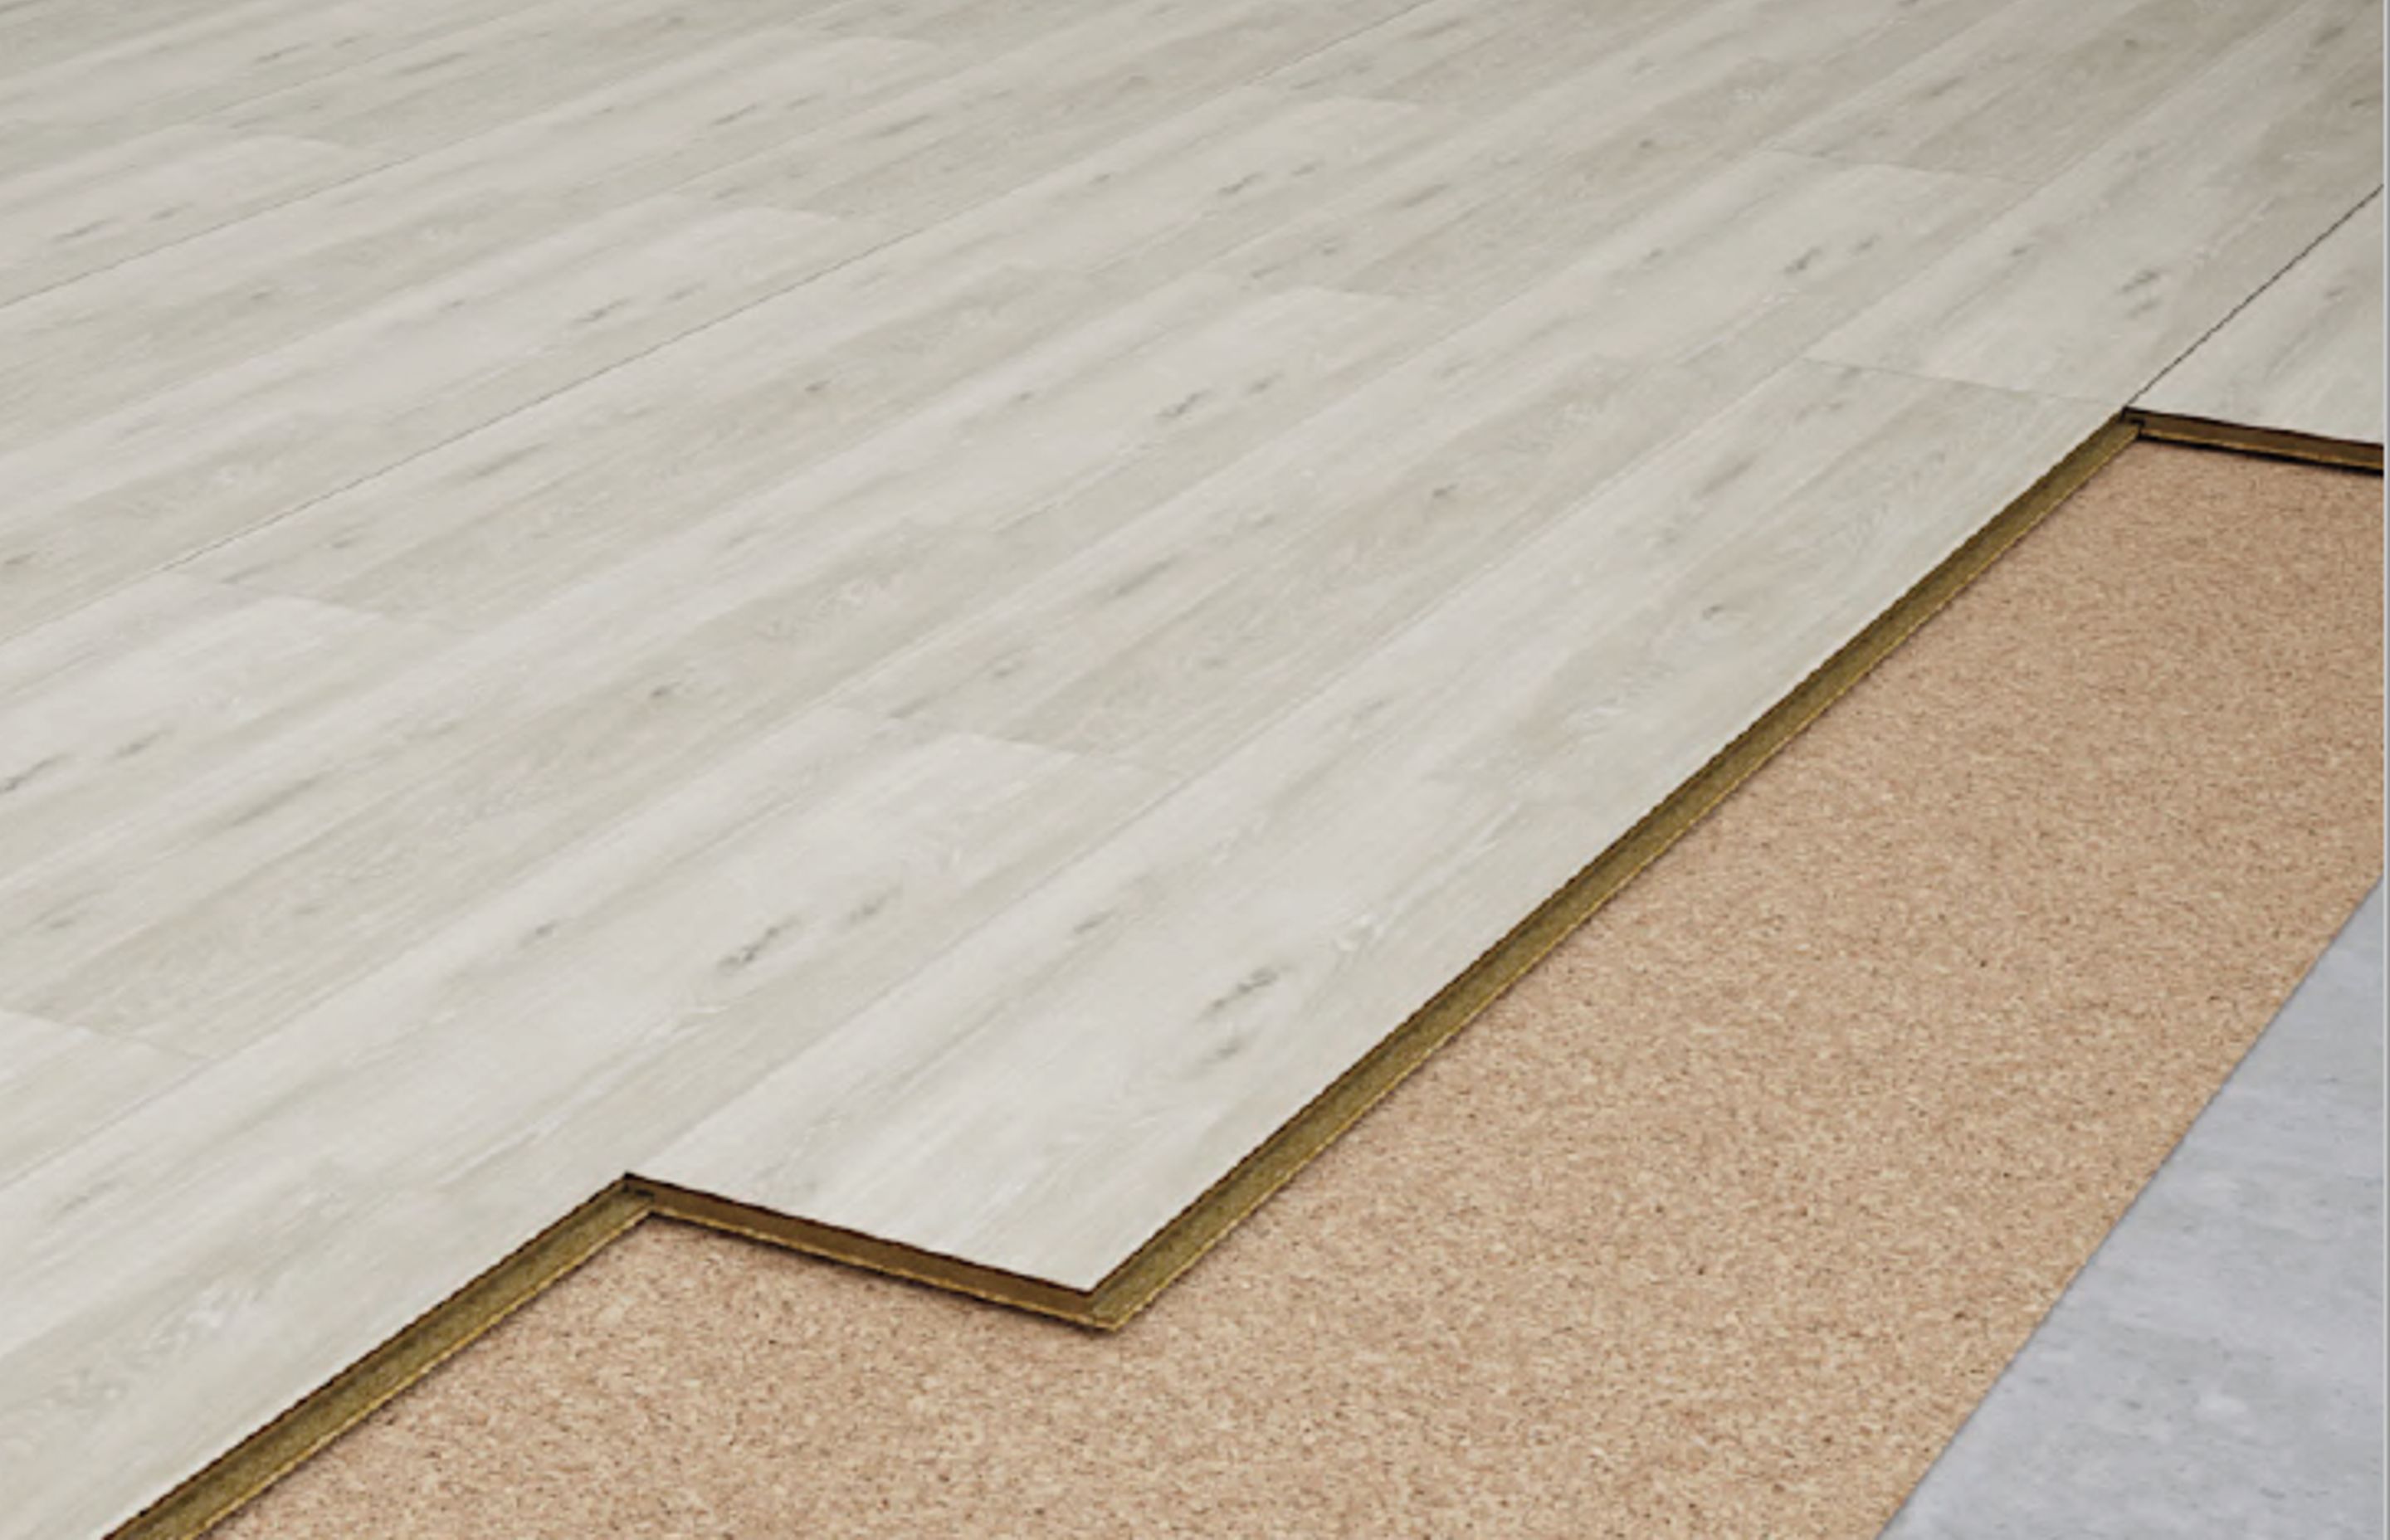 Acoustic cork underlay is an ideal choice for using under all types of hard flooring surfaces.